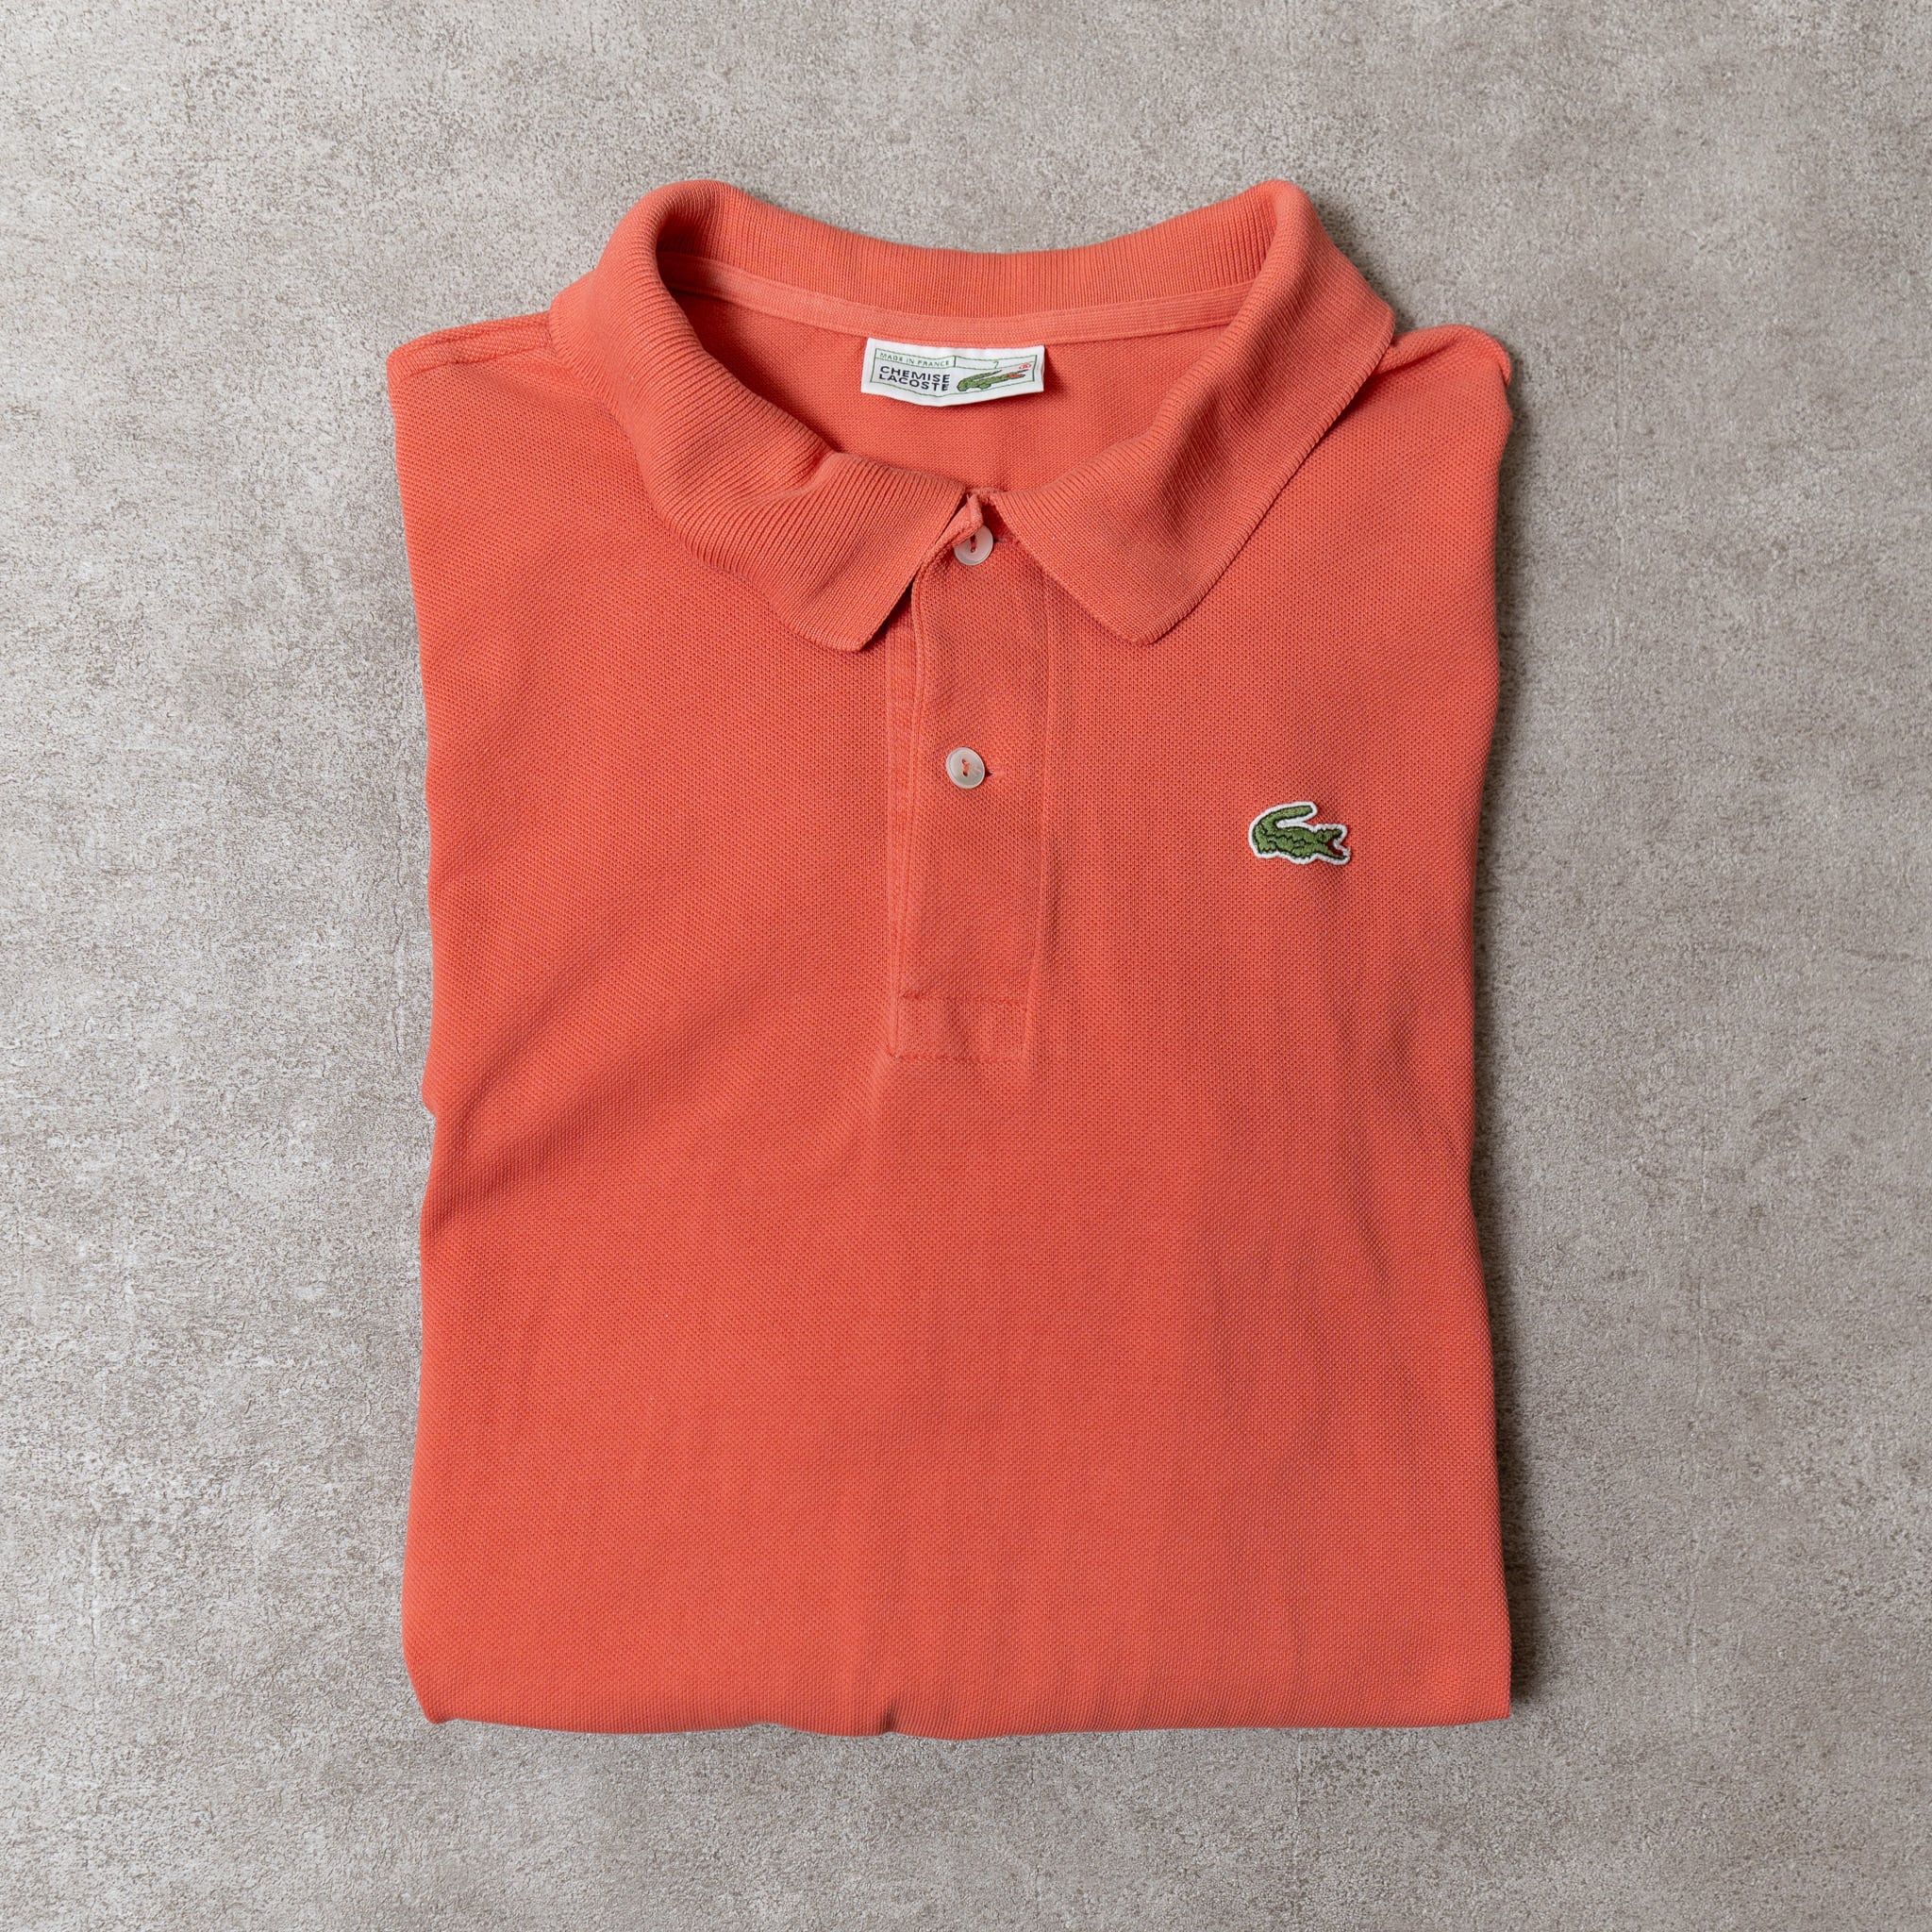 1980s】CHEMISE LACOSTE Polo Shirts Made in France フレンチラコステ 